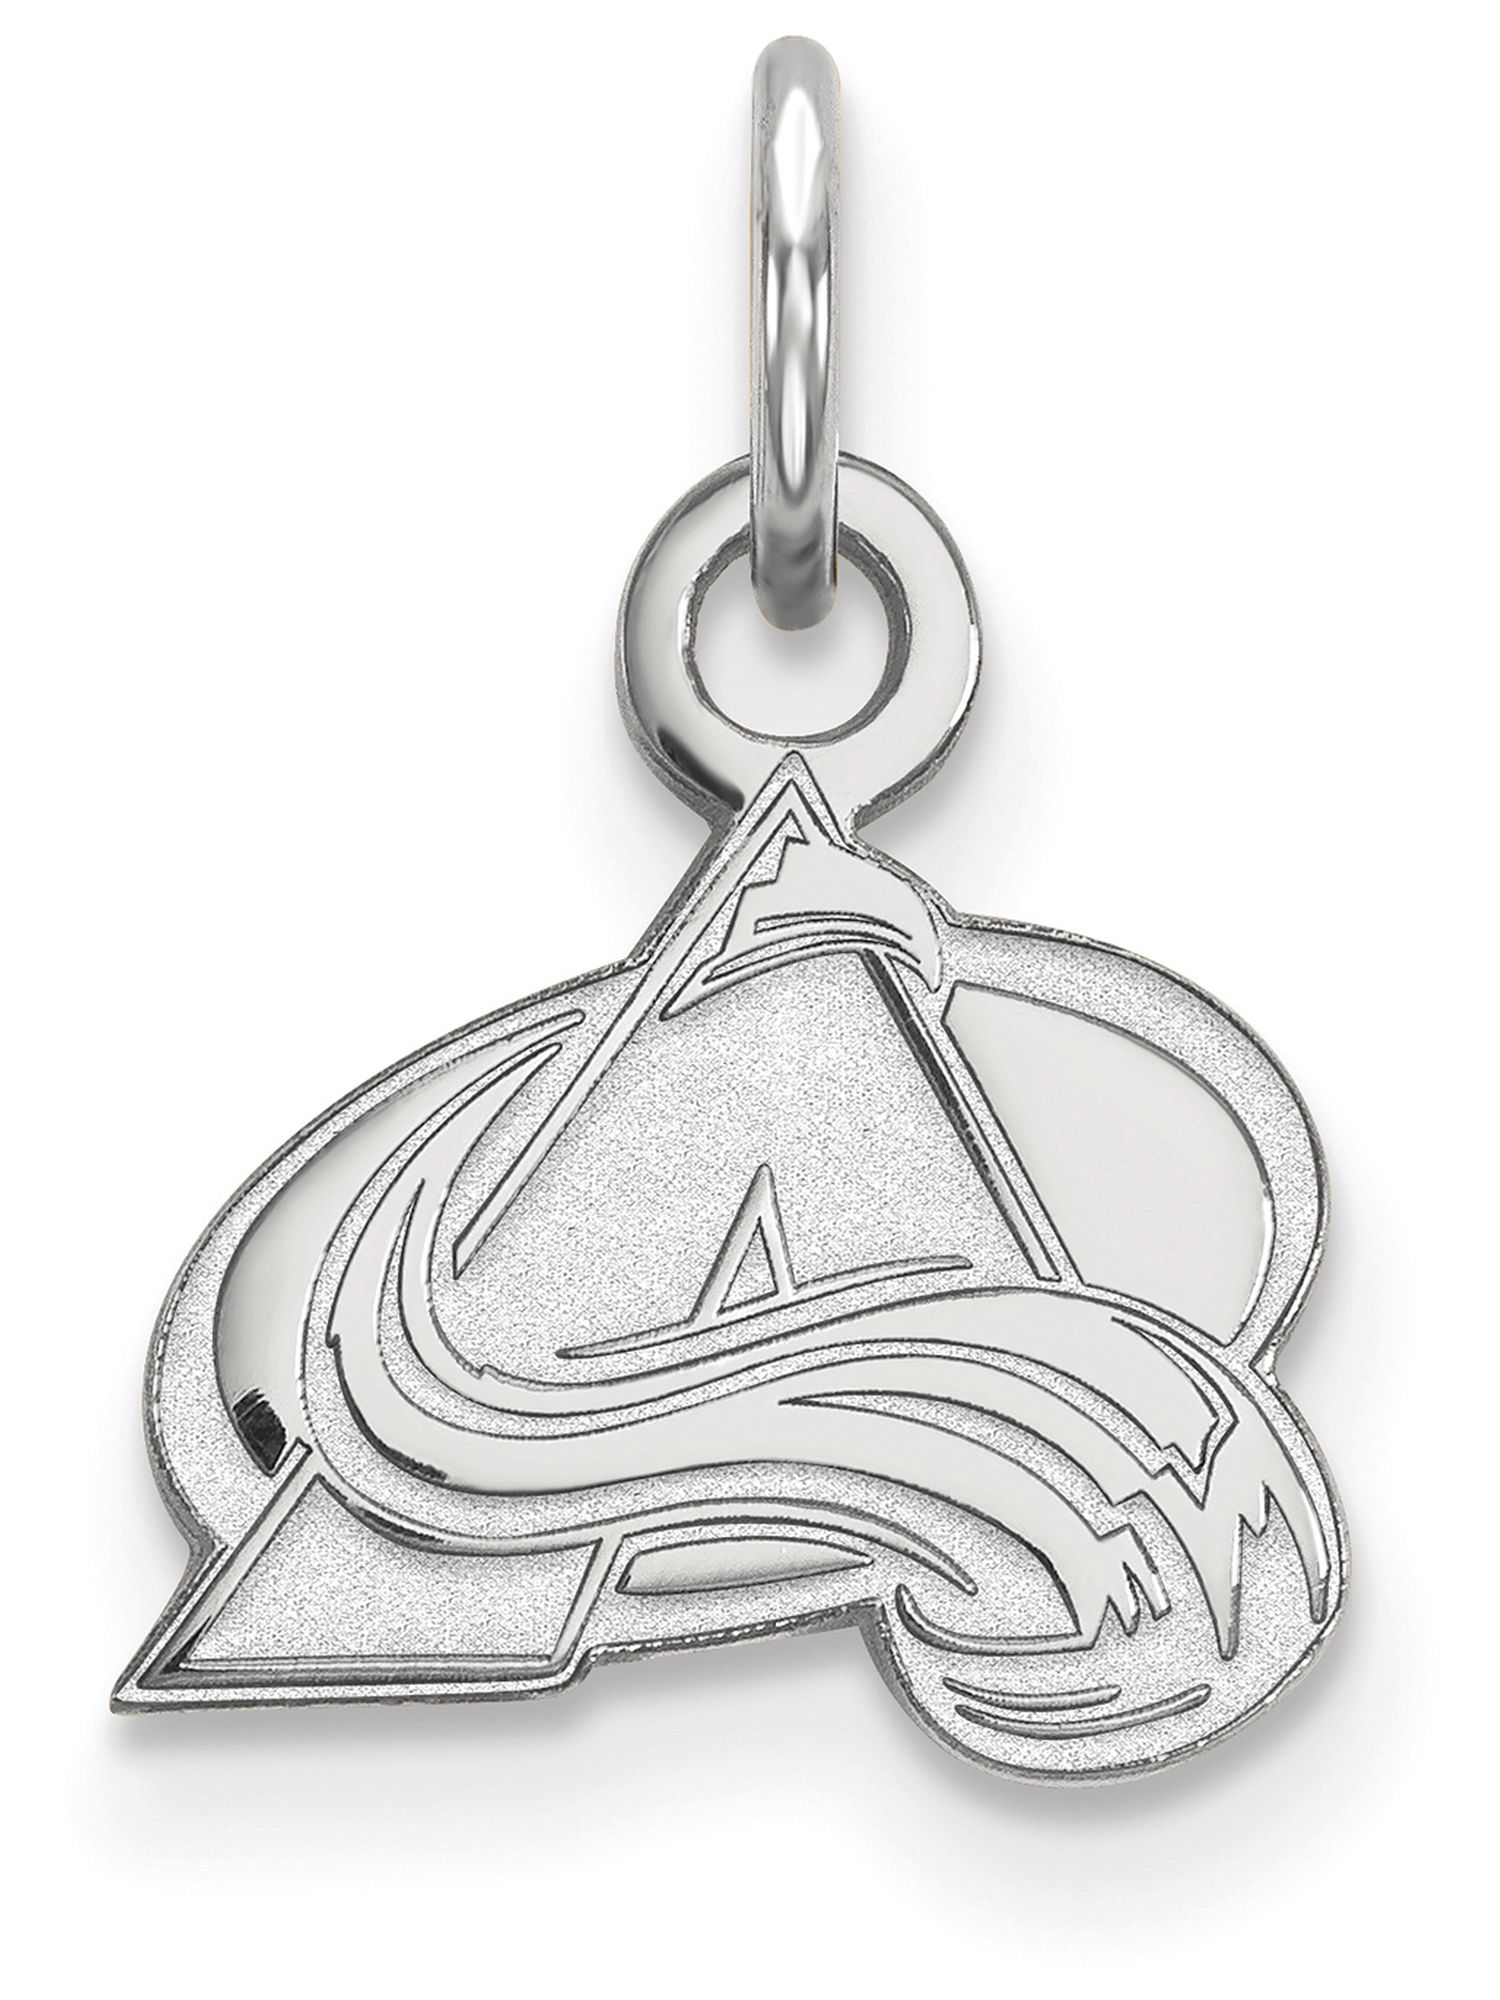 LogoArt Sterling Silver Rhodium-plated NHL Colorado Avalanche Extra Small Pendant - image 1 of 5